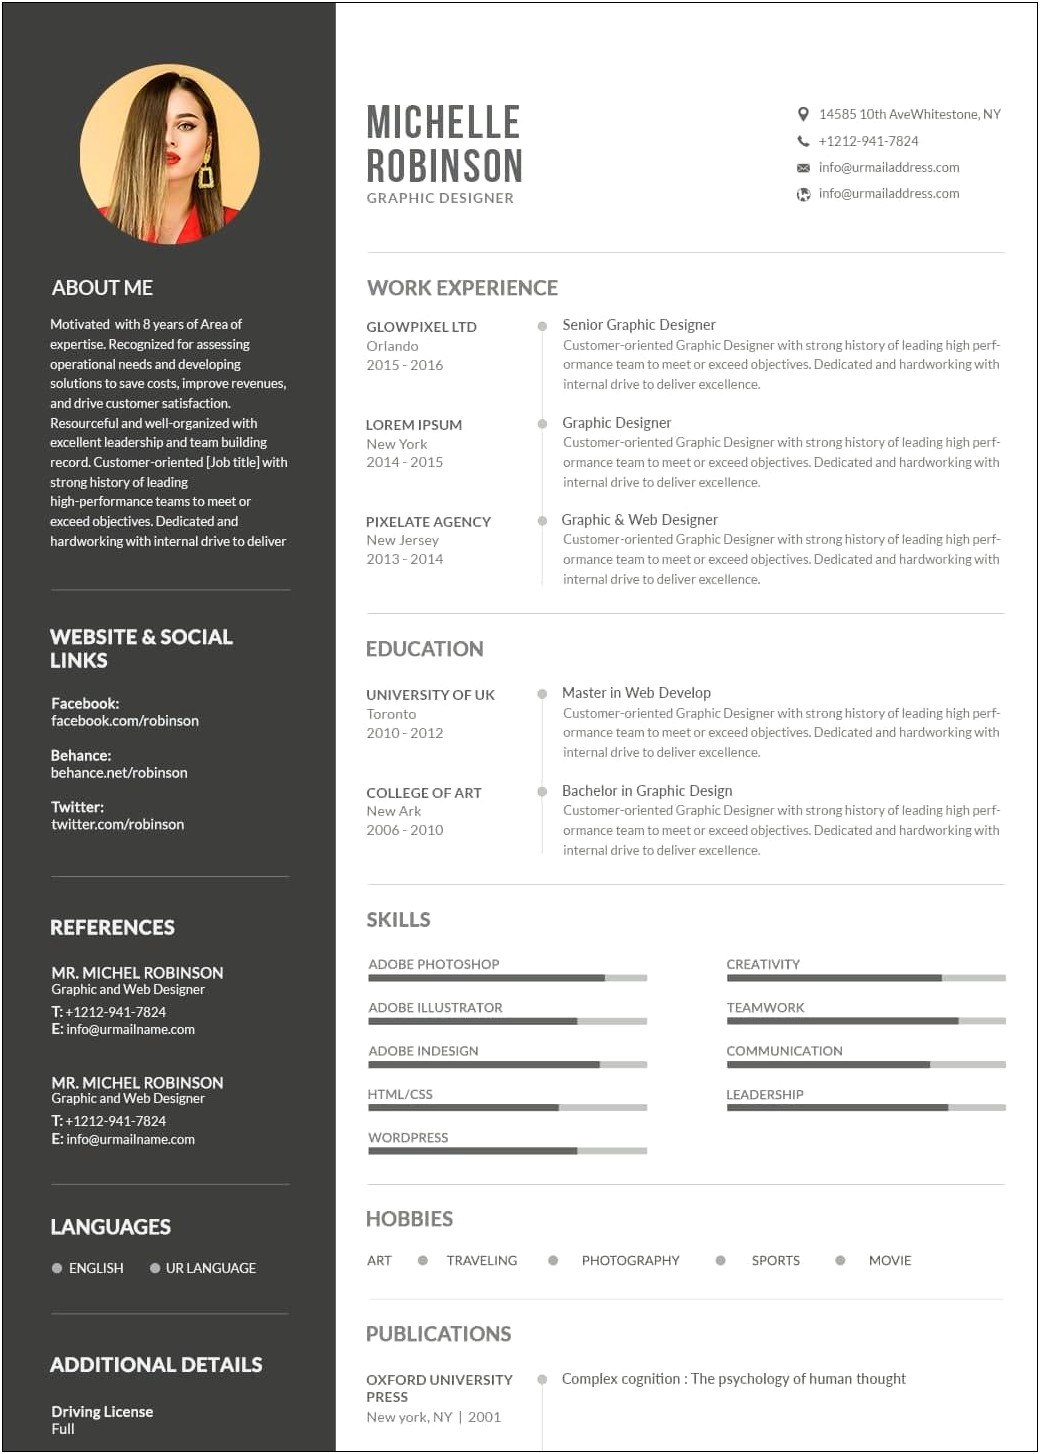 Resume Template For Healthcare Jobs